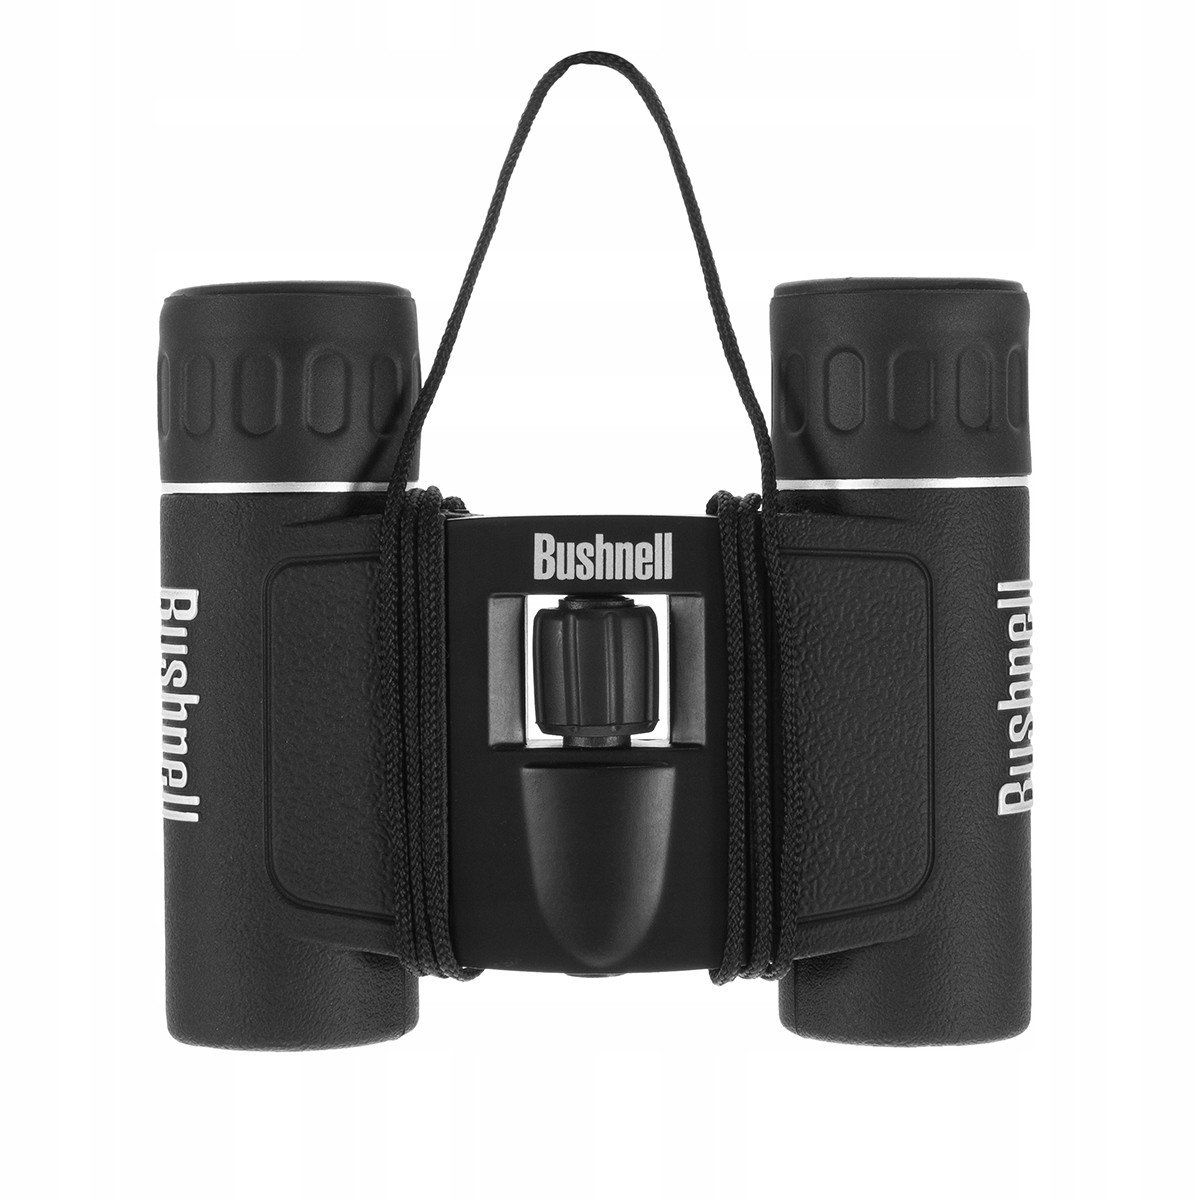 Dalekohled Bushnell PowerView 8x21